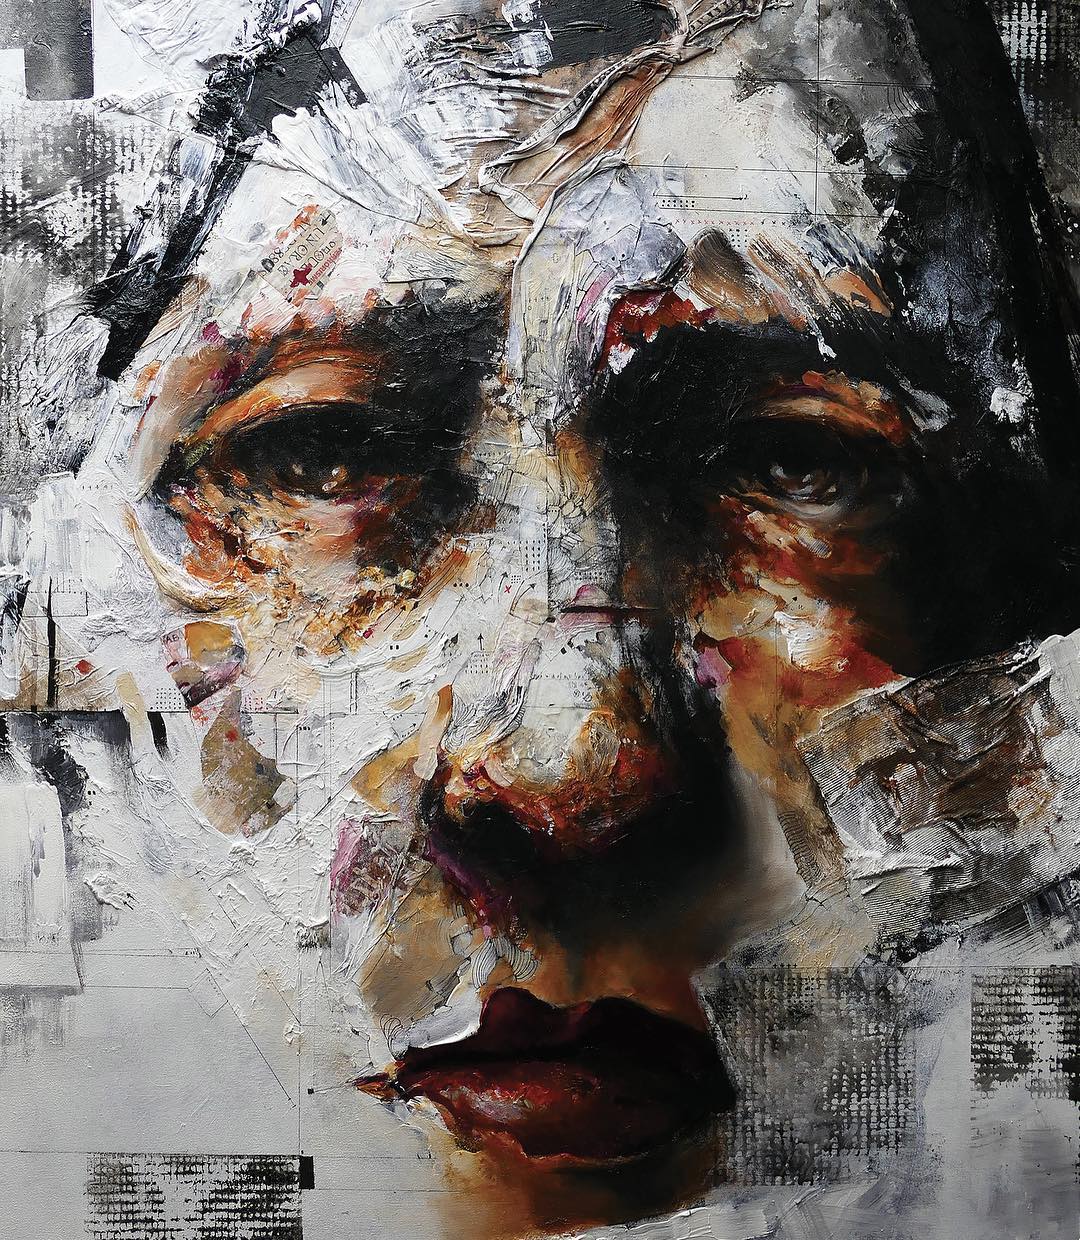 A Study in Melancholy: The Metaphysical Art of Eric Lacombe » Design ...